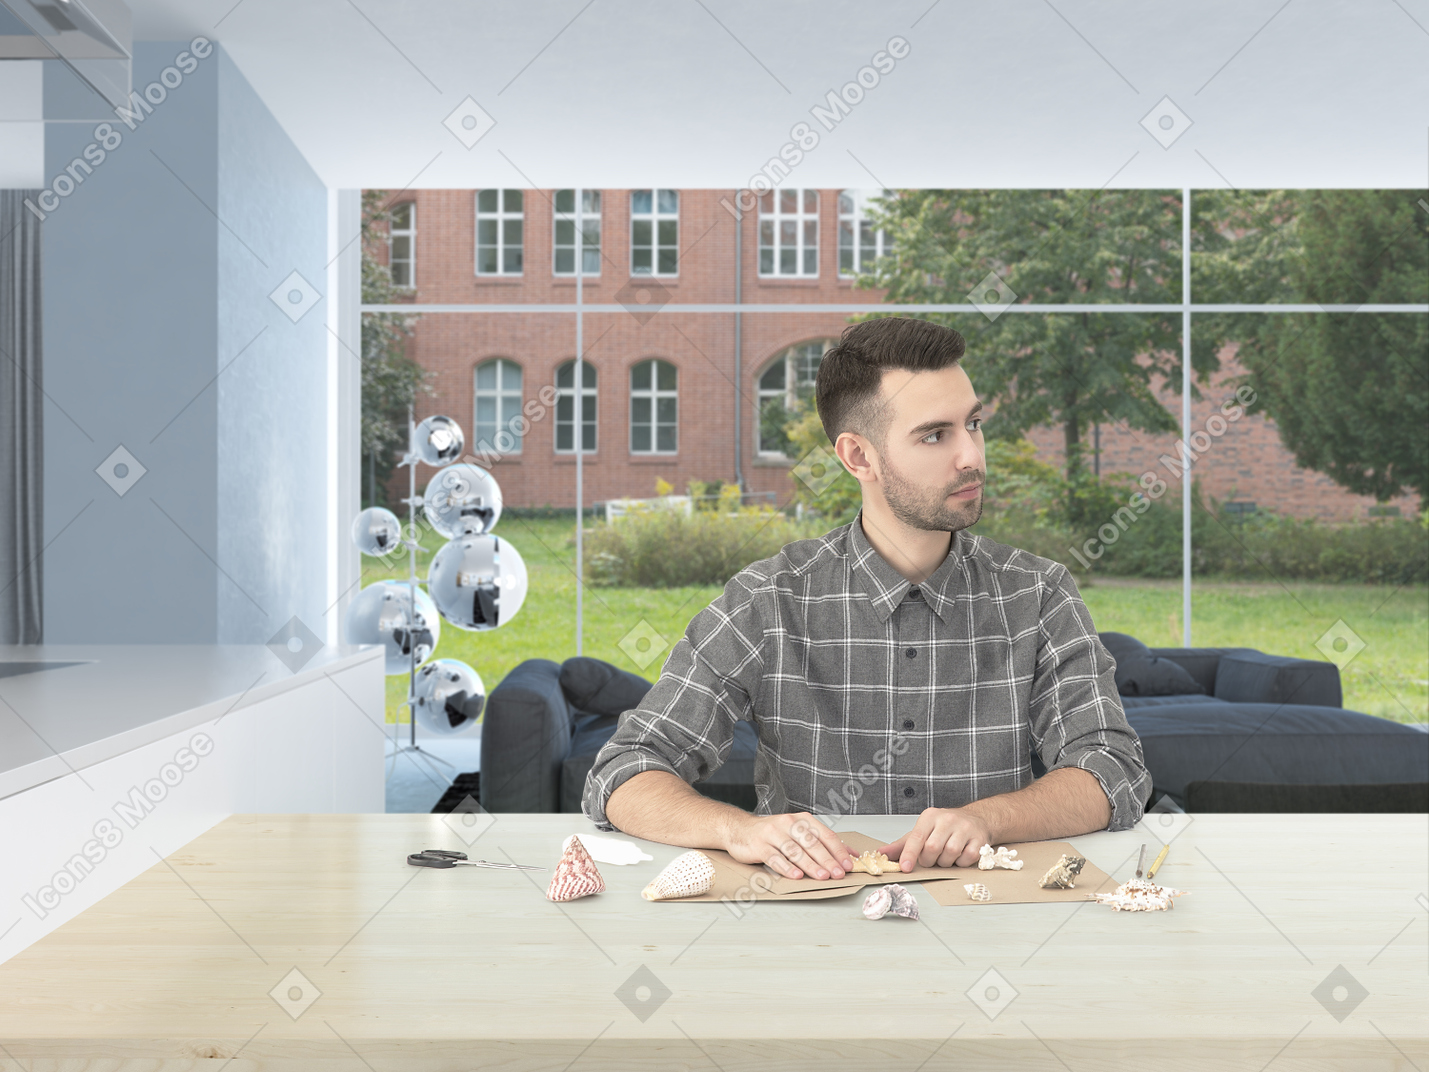 Handsome young man in a checkered shirt, sitting in a bright modern room crafting something from craft paper and seashells